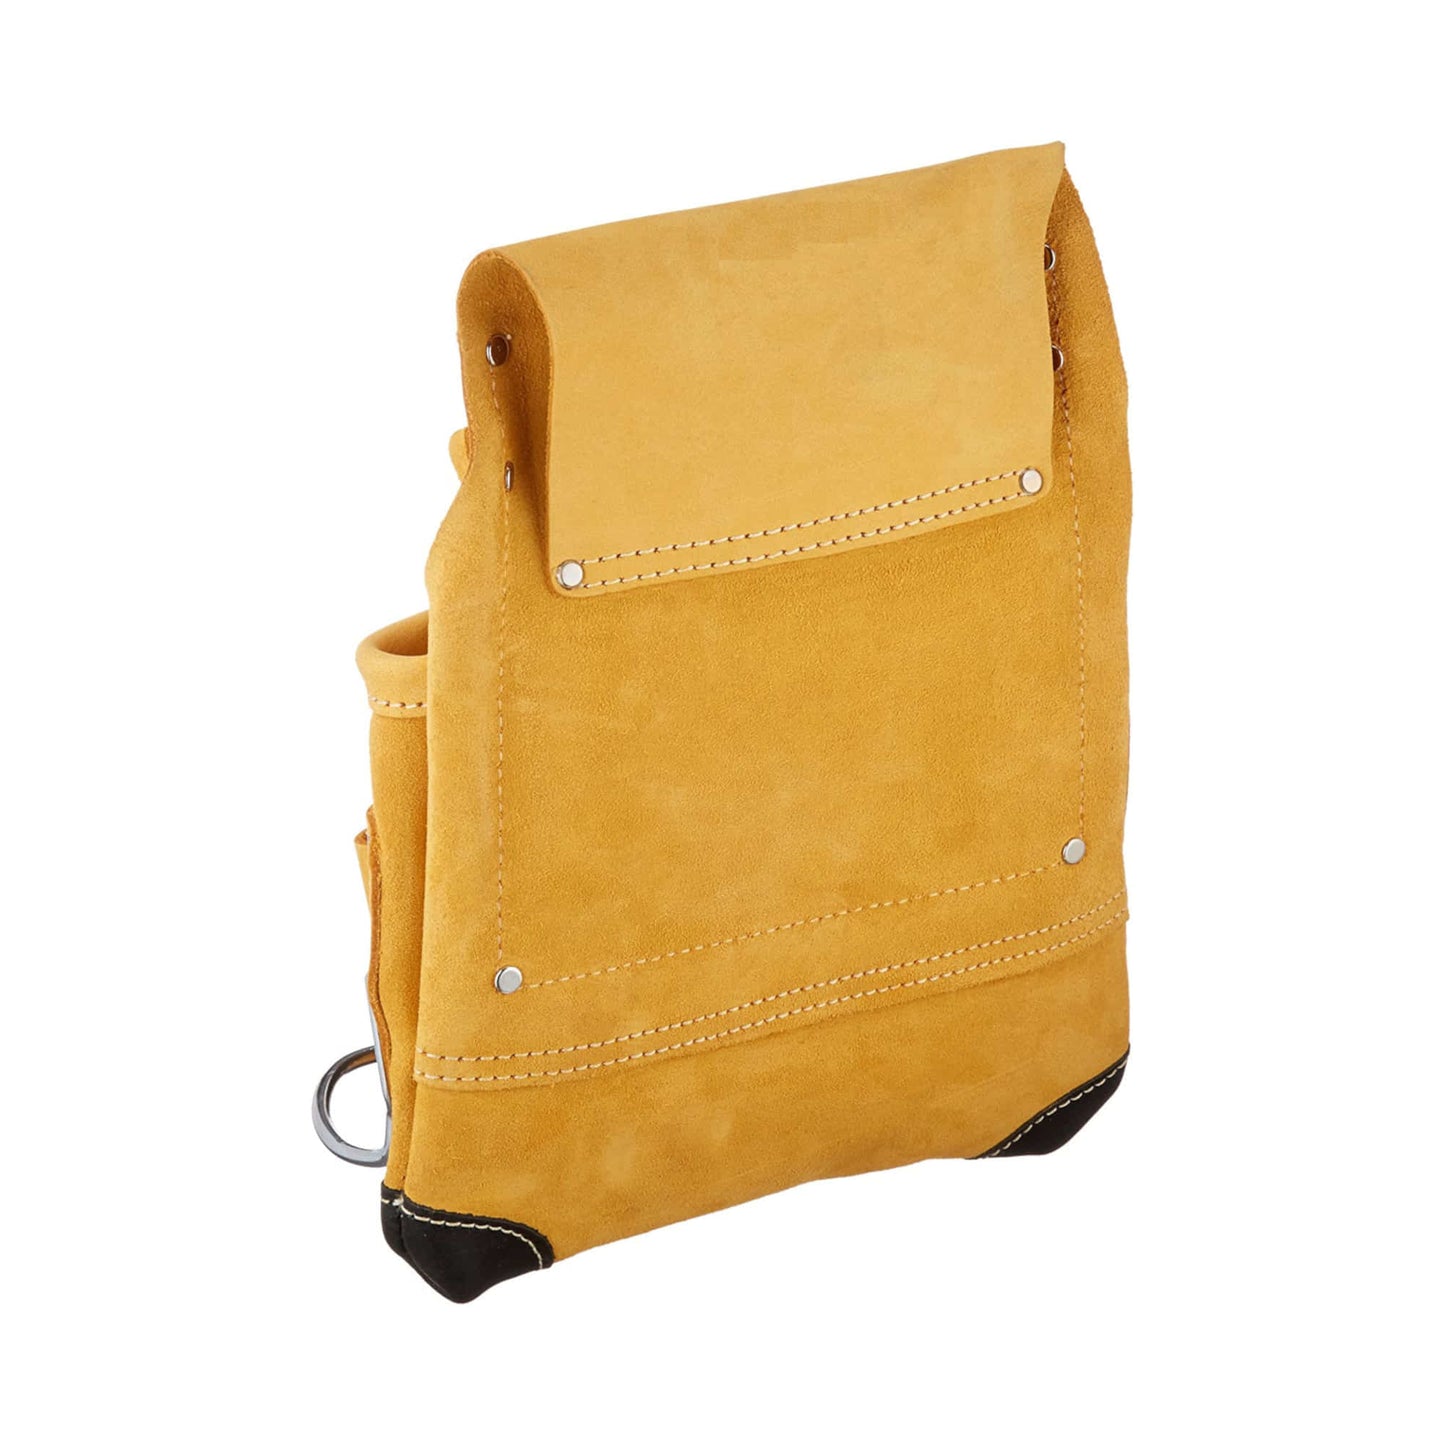 Style n Craft 93923 - 10 Pocket Carpenter's Nail & Tool Pouch in Yellow Top Grain Leather with Reinforced Corners in Black Top Grain Leather - Back Angled View